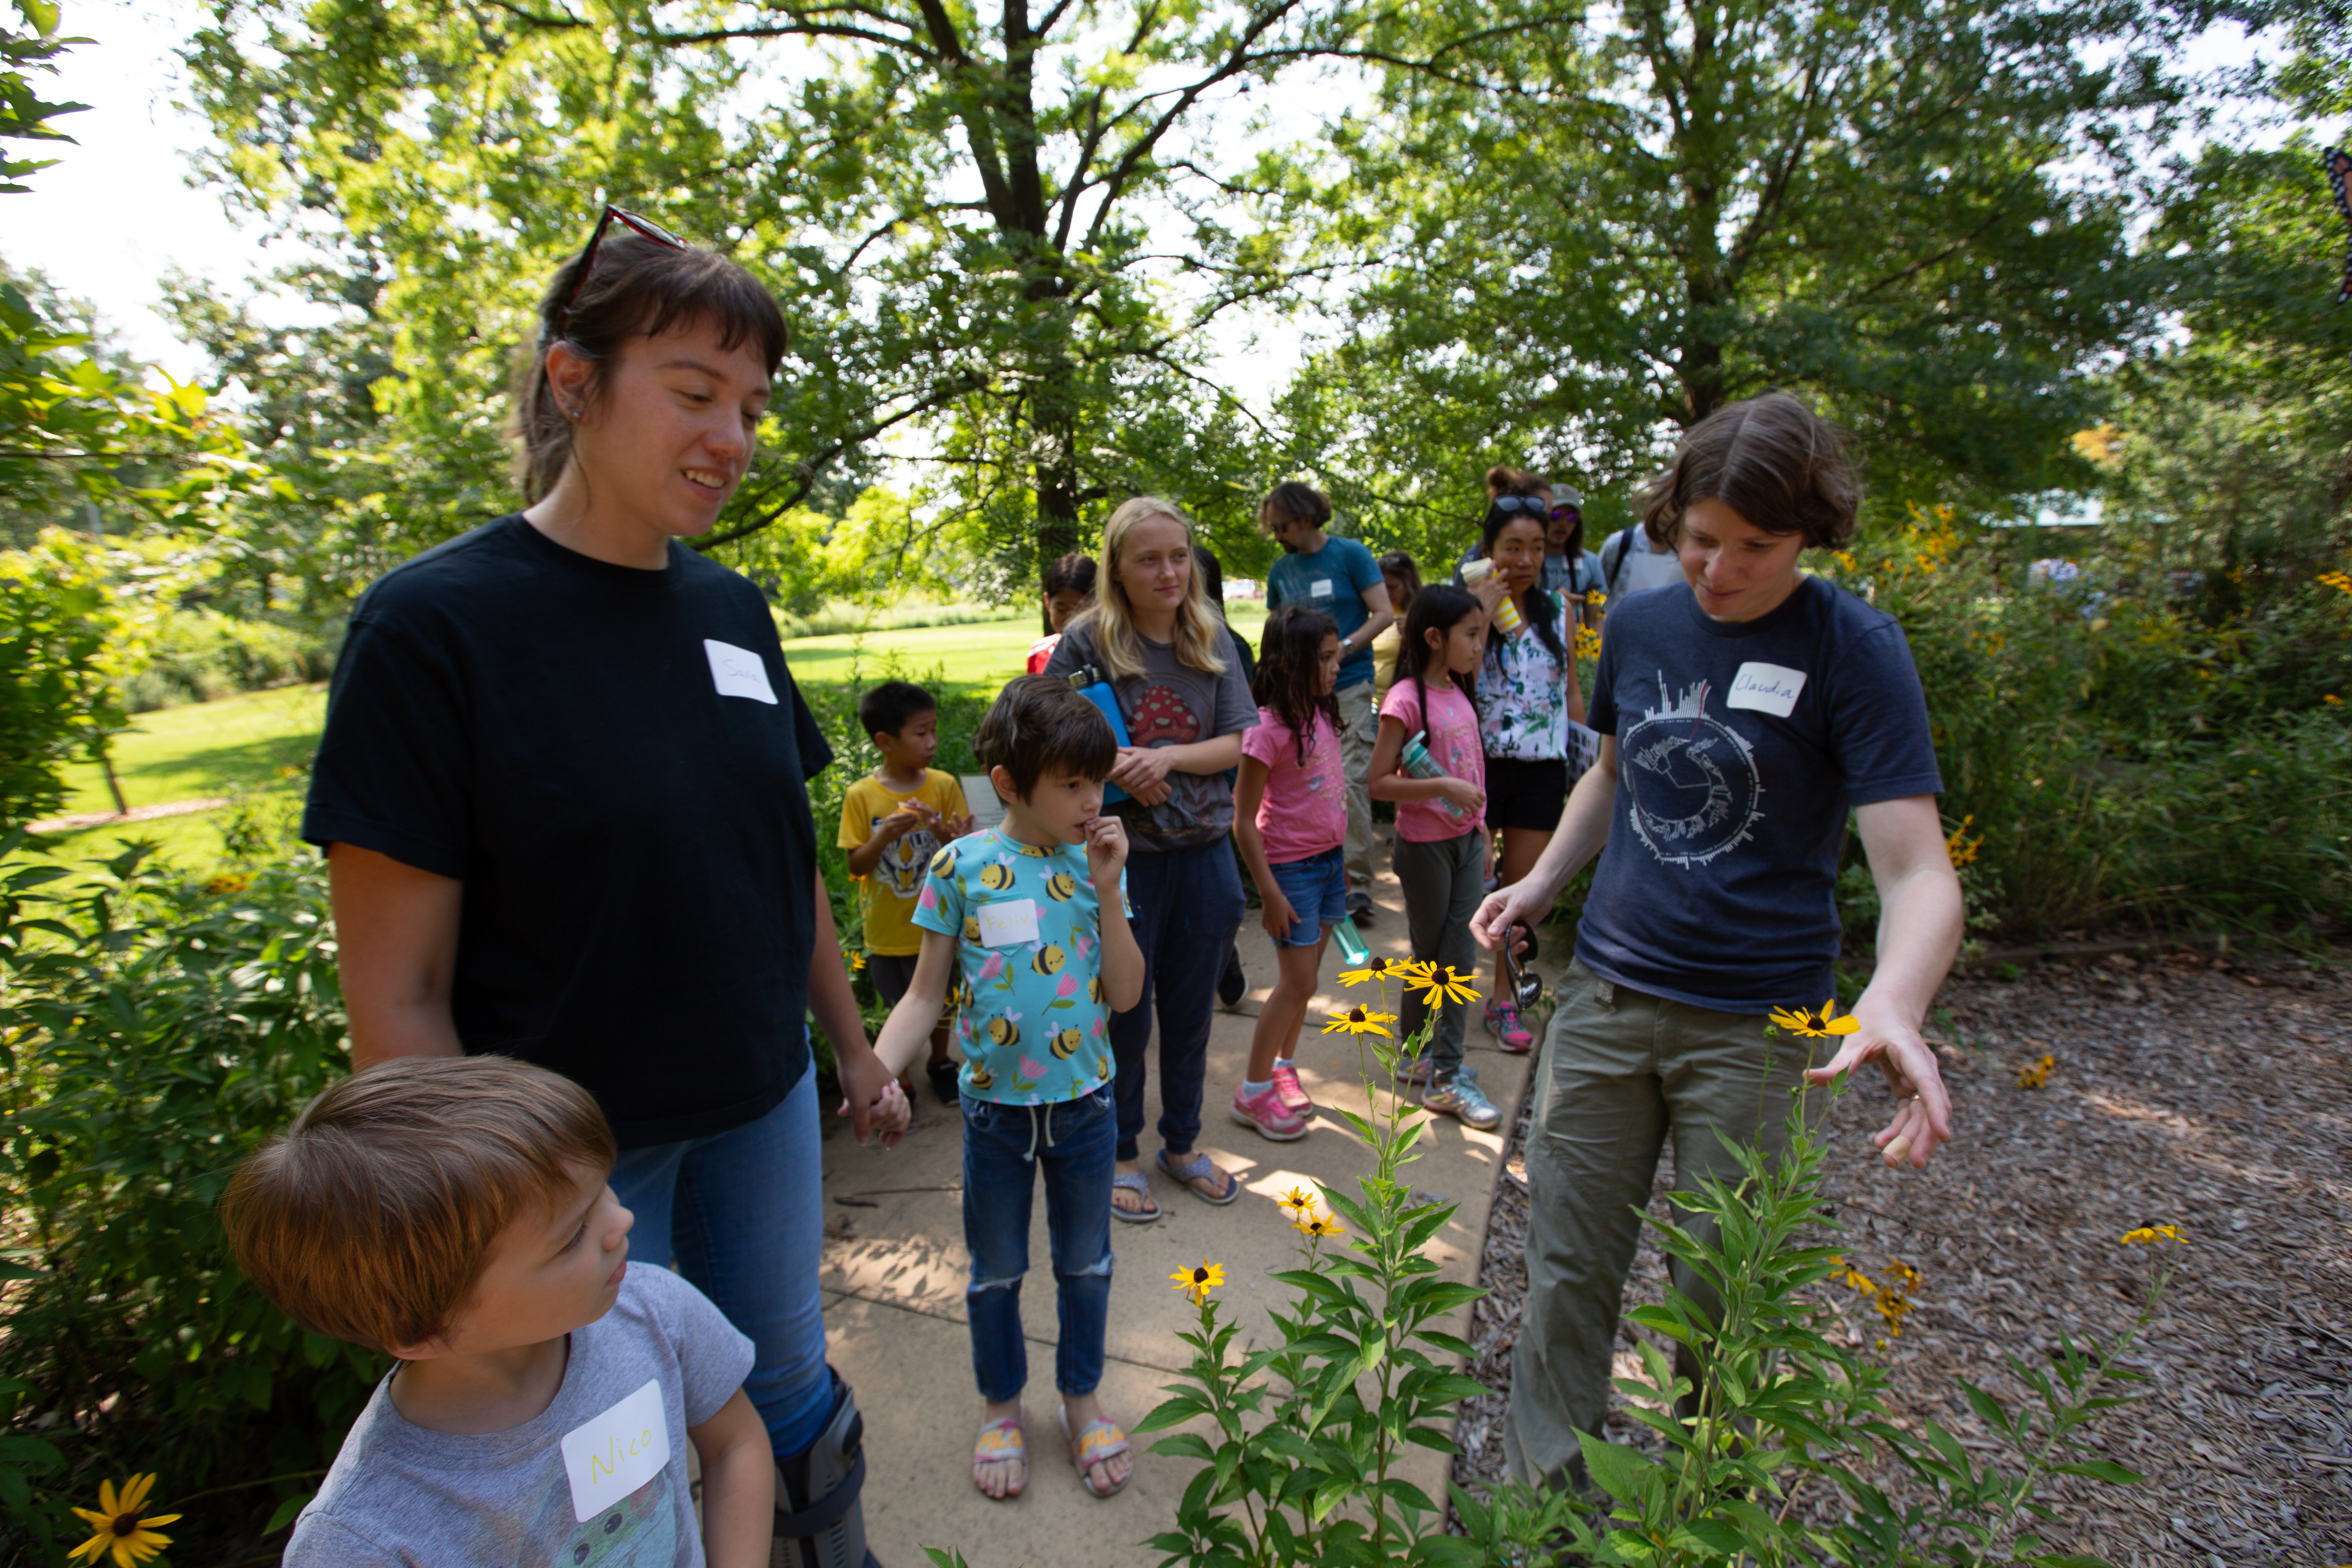 Guided outdoor walk for the Bees event, Anita Purves Nature Center